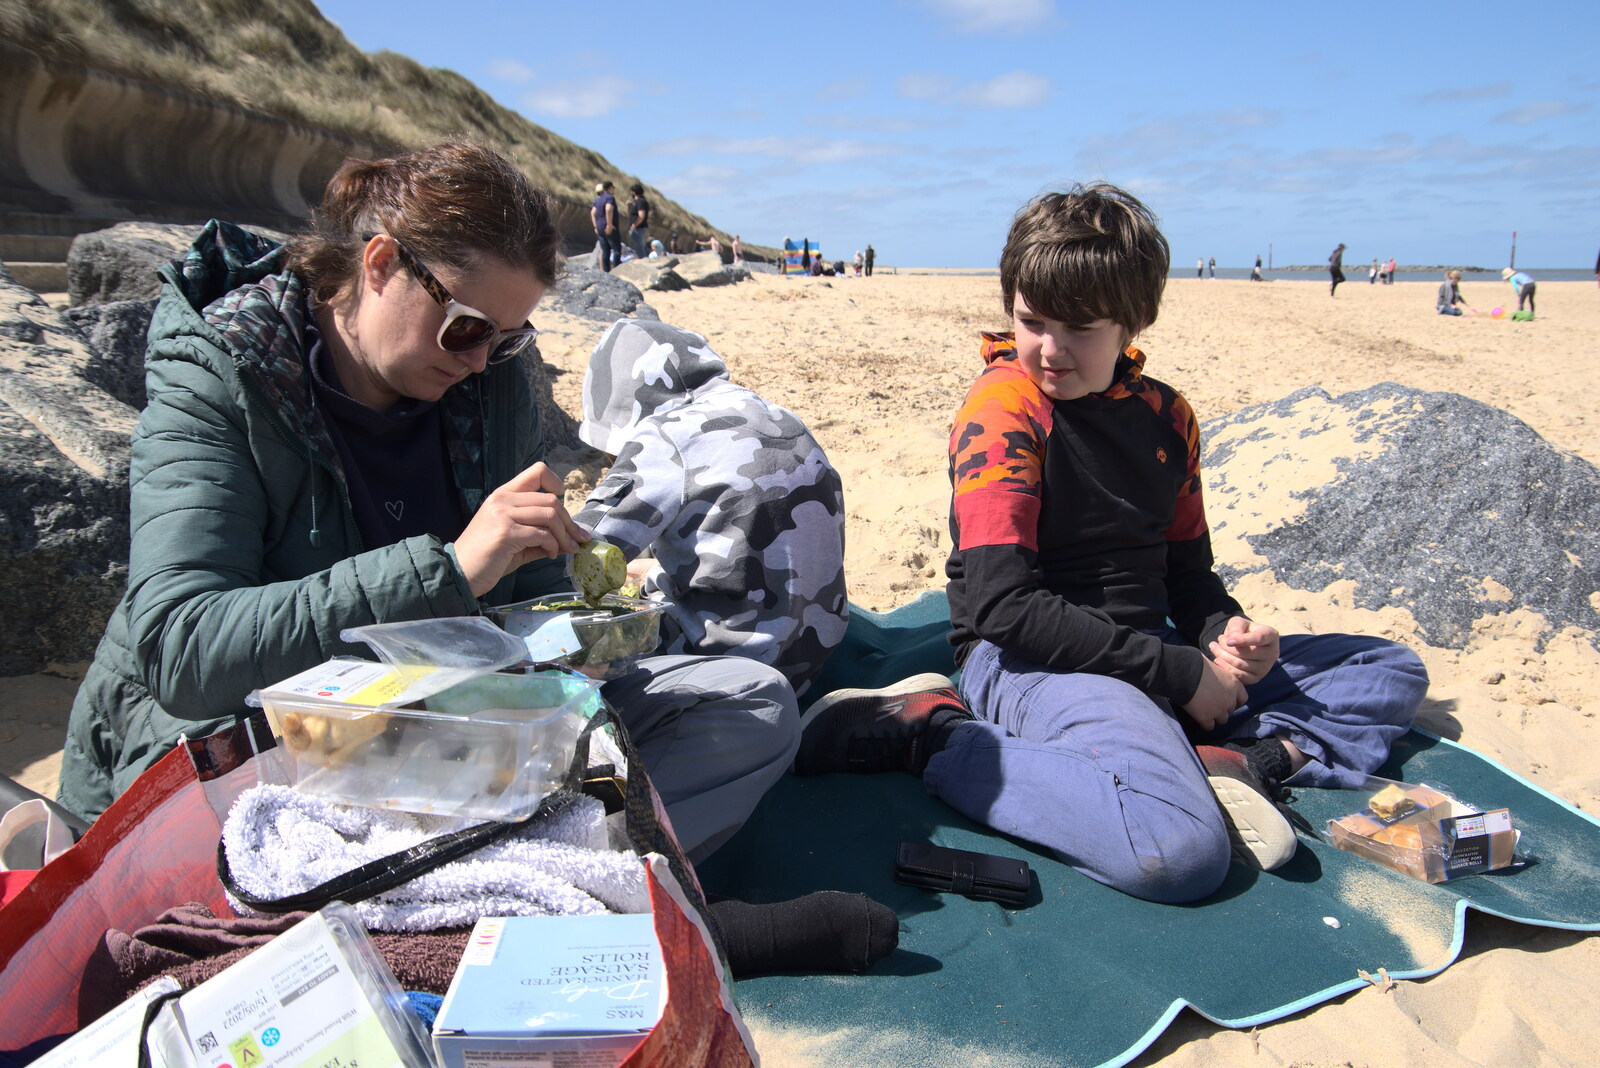 Isobel breaks out the M&S picnic products from On the Beach at Sea Palling, Norfolk - 8th May 2022